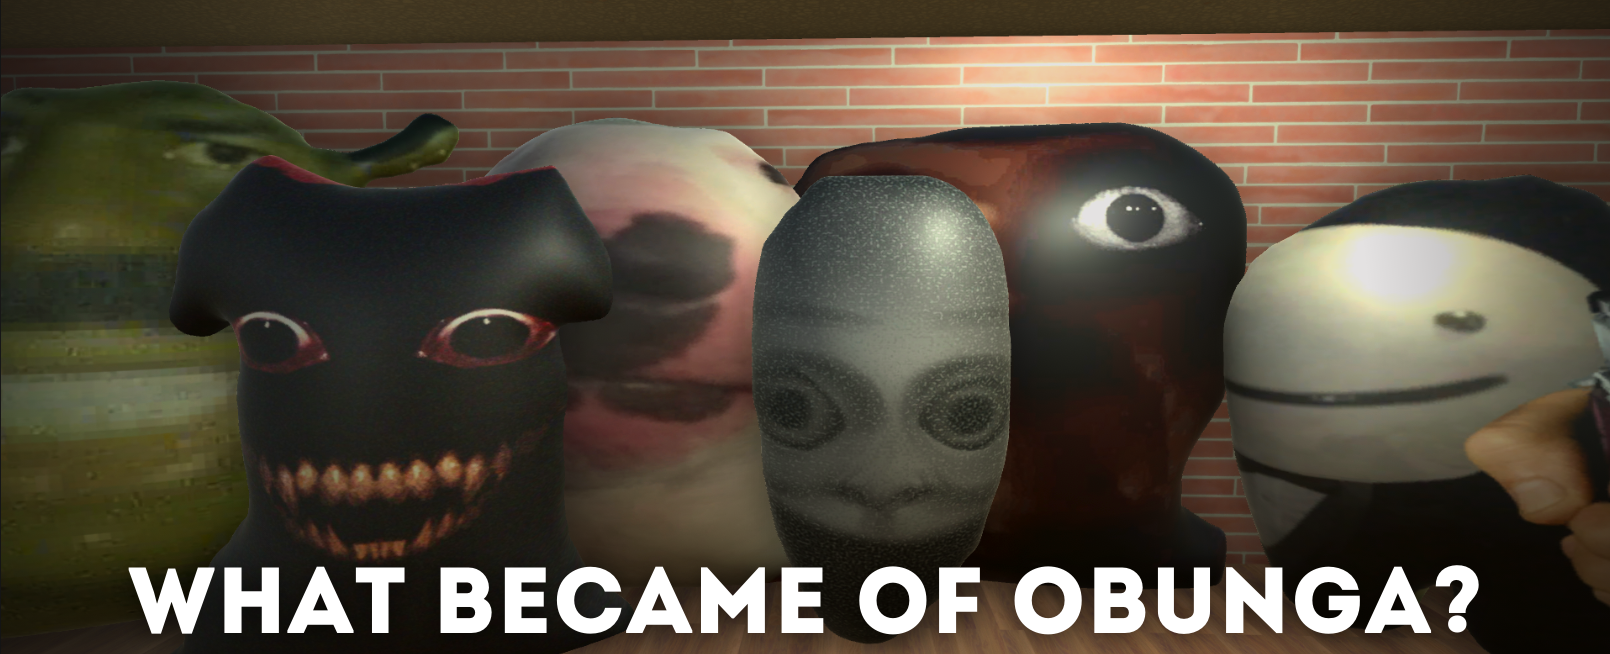 What became of obunga?